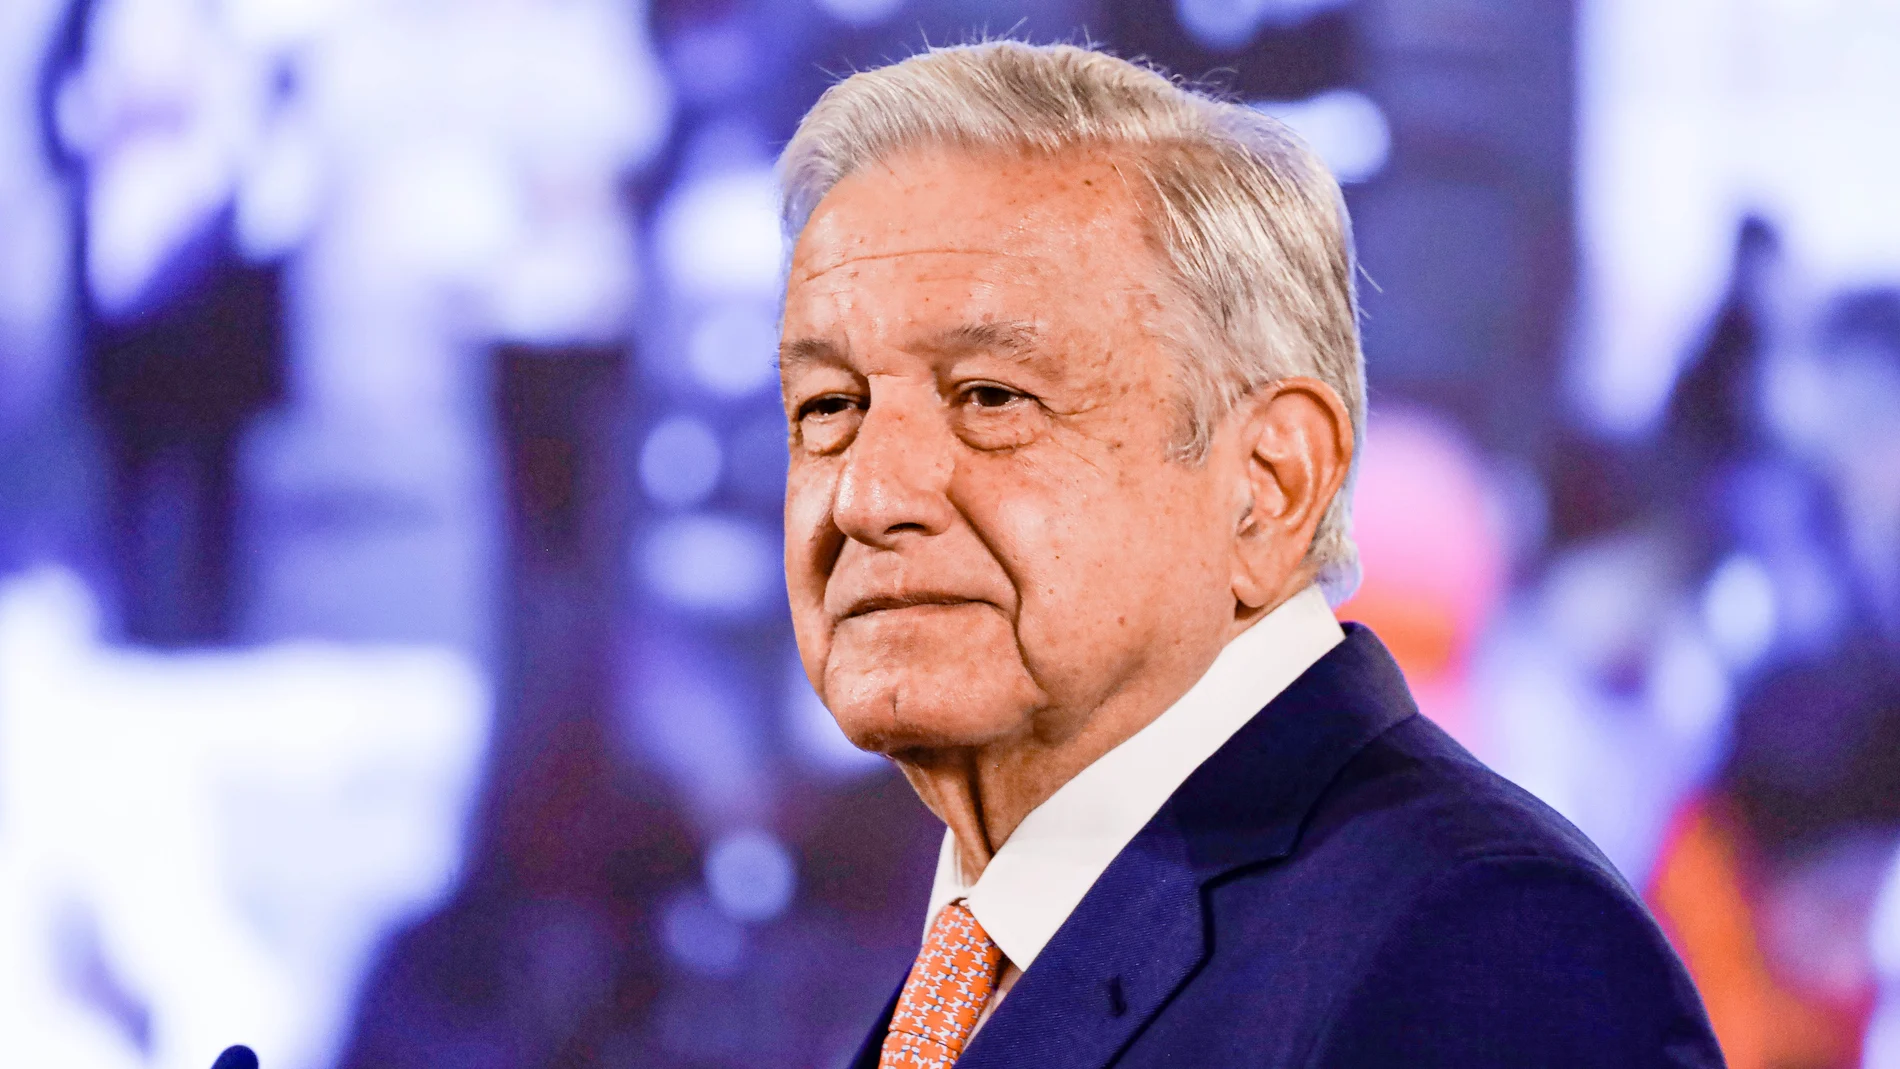 January 8, 2024, Mexico City, Munich, Mexico: January 8, 2024, Mexico City, Mexico: The president of Mexico, Andres Manuel Lopez Obrador at a press conference before reporters at the National Palace in Mexico City. 08/01/2024